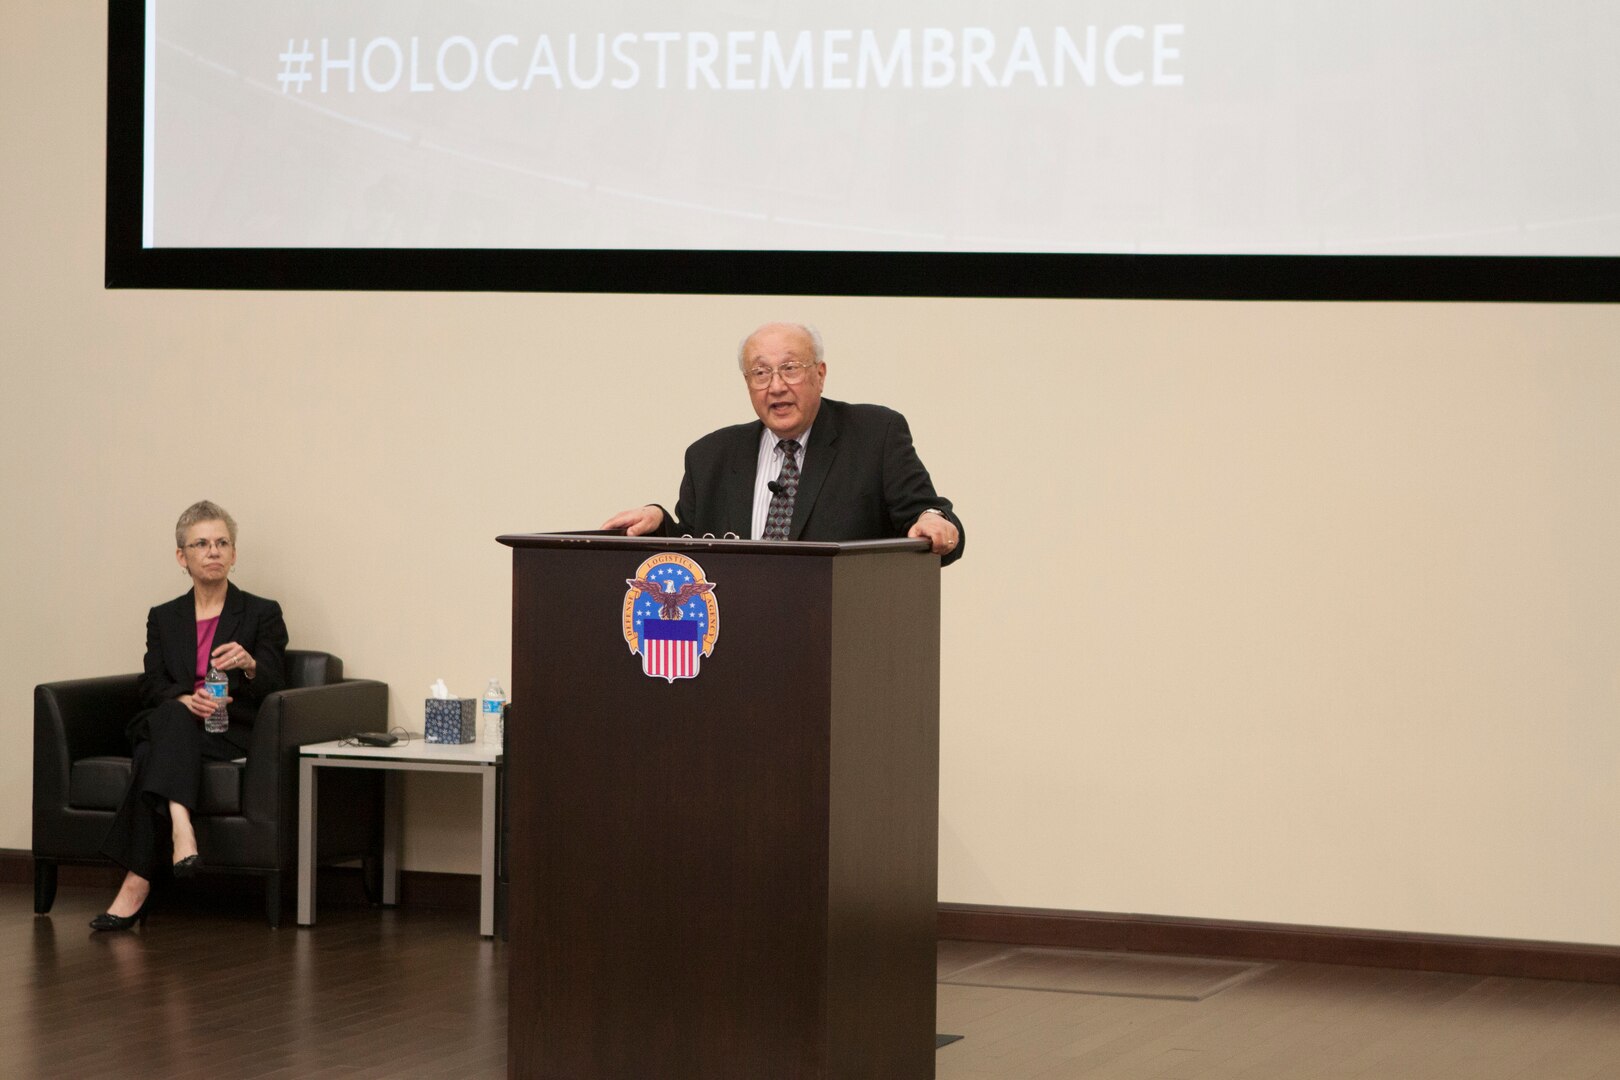 Employees of DLA Distribution Headquarters in New Cumberland, Pennsylvania, paid respect to Holocaust Remembrance Day on Apr. 26, with a presentation featuring Dr. Edward S. Beck, a retired college professor and professional counselor.